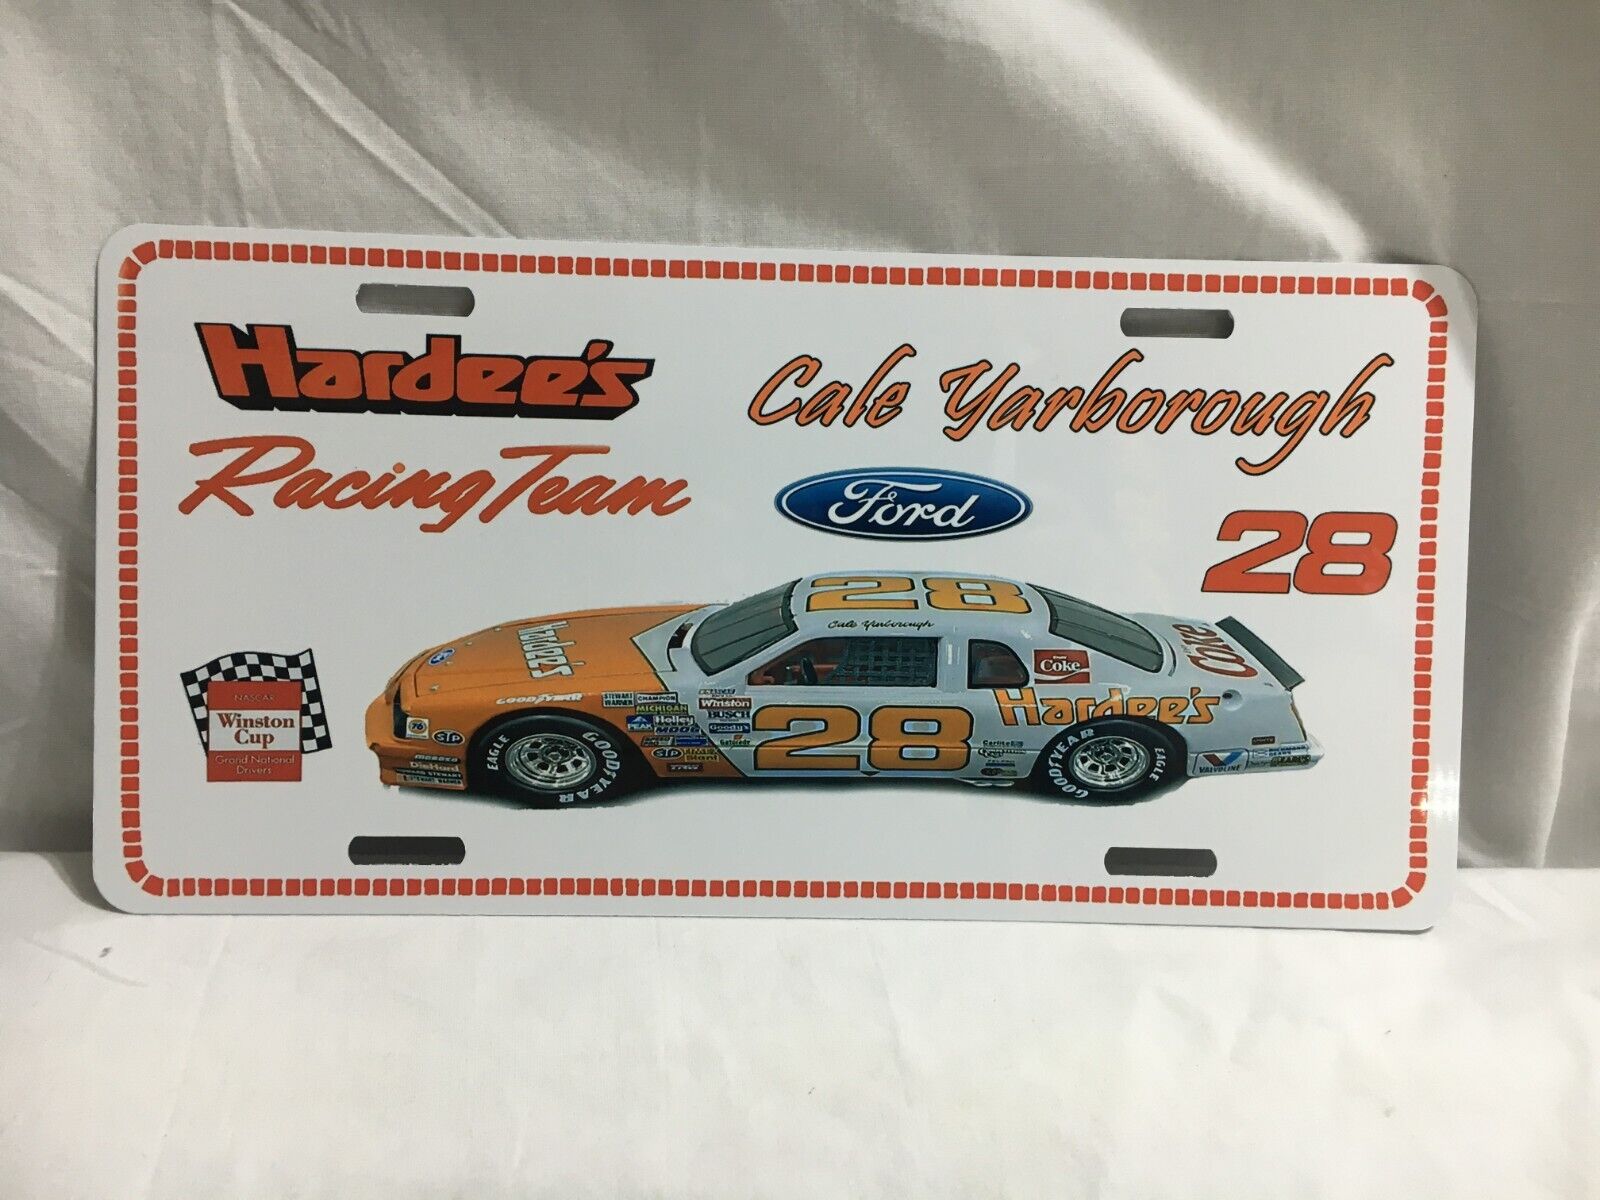 RETRO hardees Racing Team CALE YARBOROUGH License Plate 28 ford 1980s 